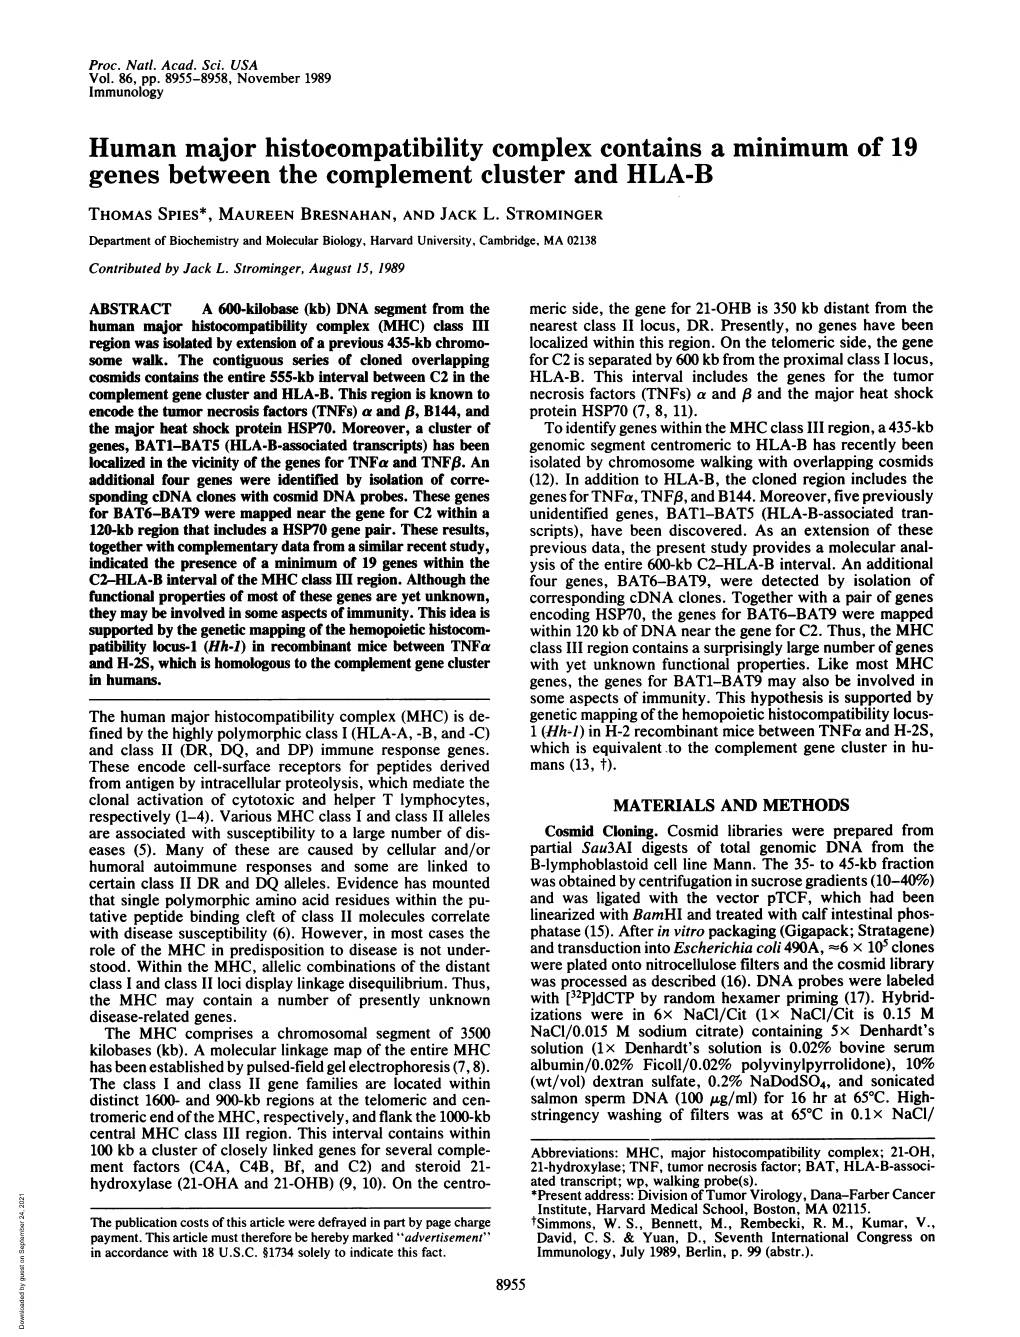 Genes Between the Complement Cluster and HLA-B THOMAS SPIES*, MAUREEN BRESNAHAN, and JACK L